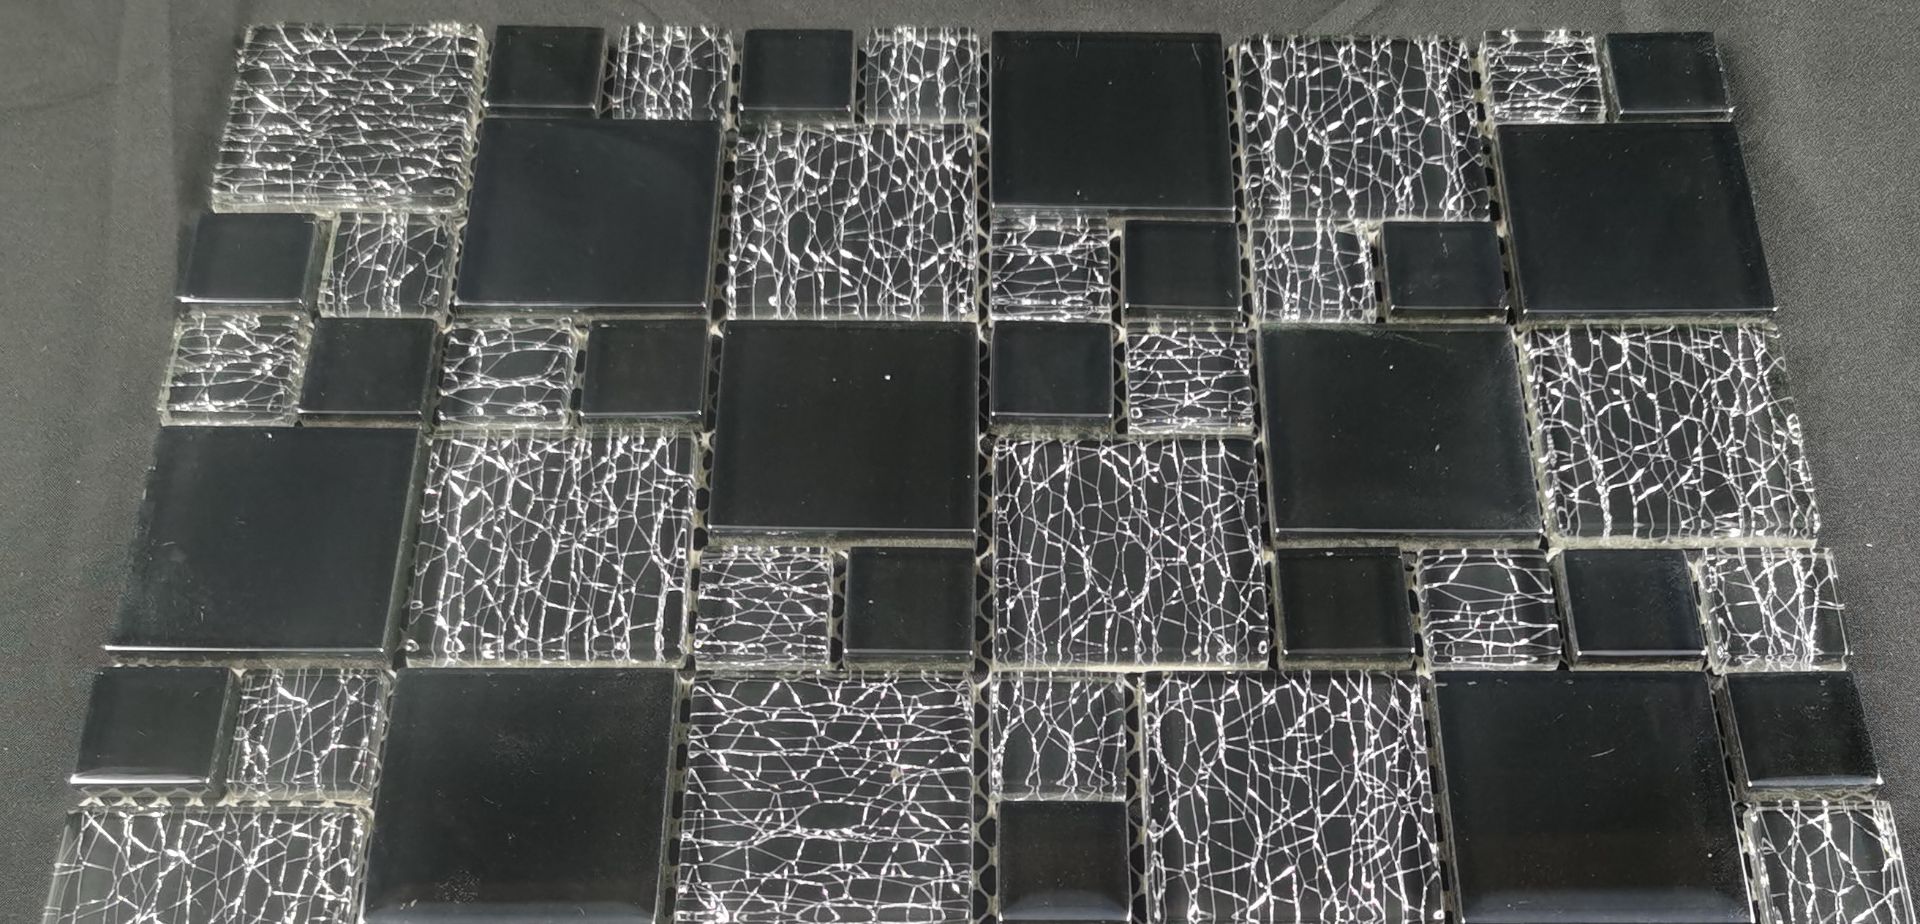 5 Square Metres - High Quality Glass/Stainless Steel Mosaic Tiles-55 Sheets - Image 4 of 5